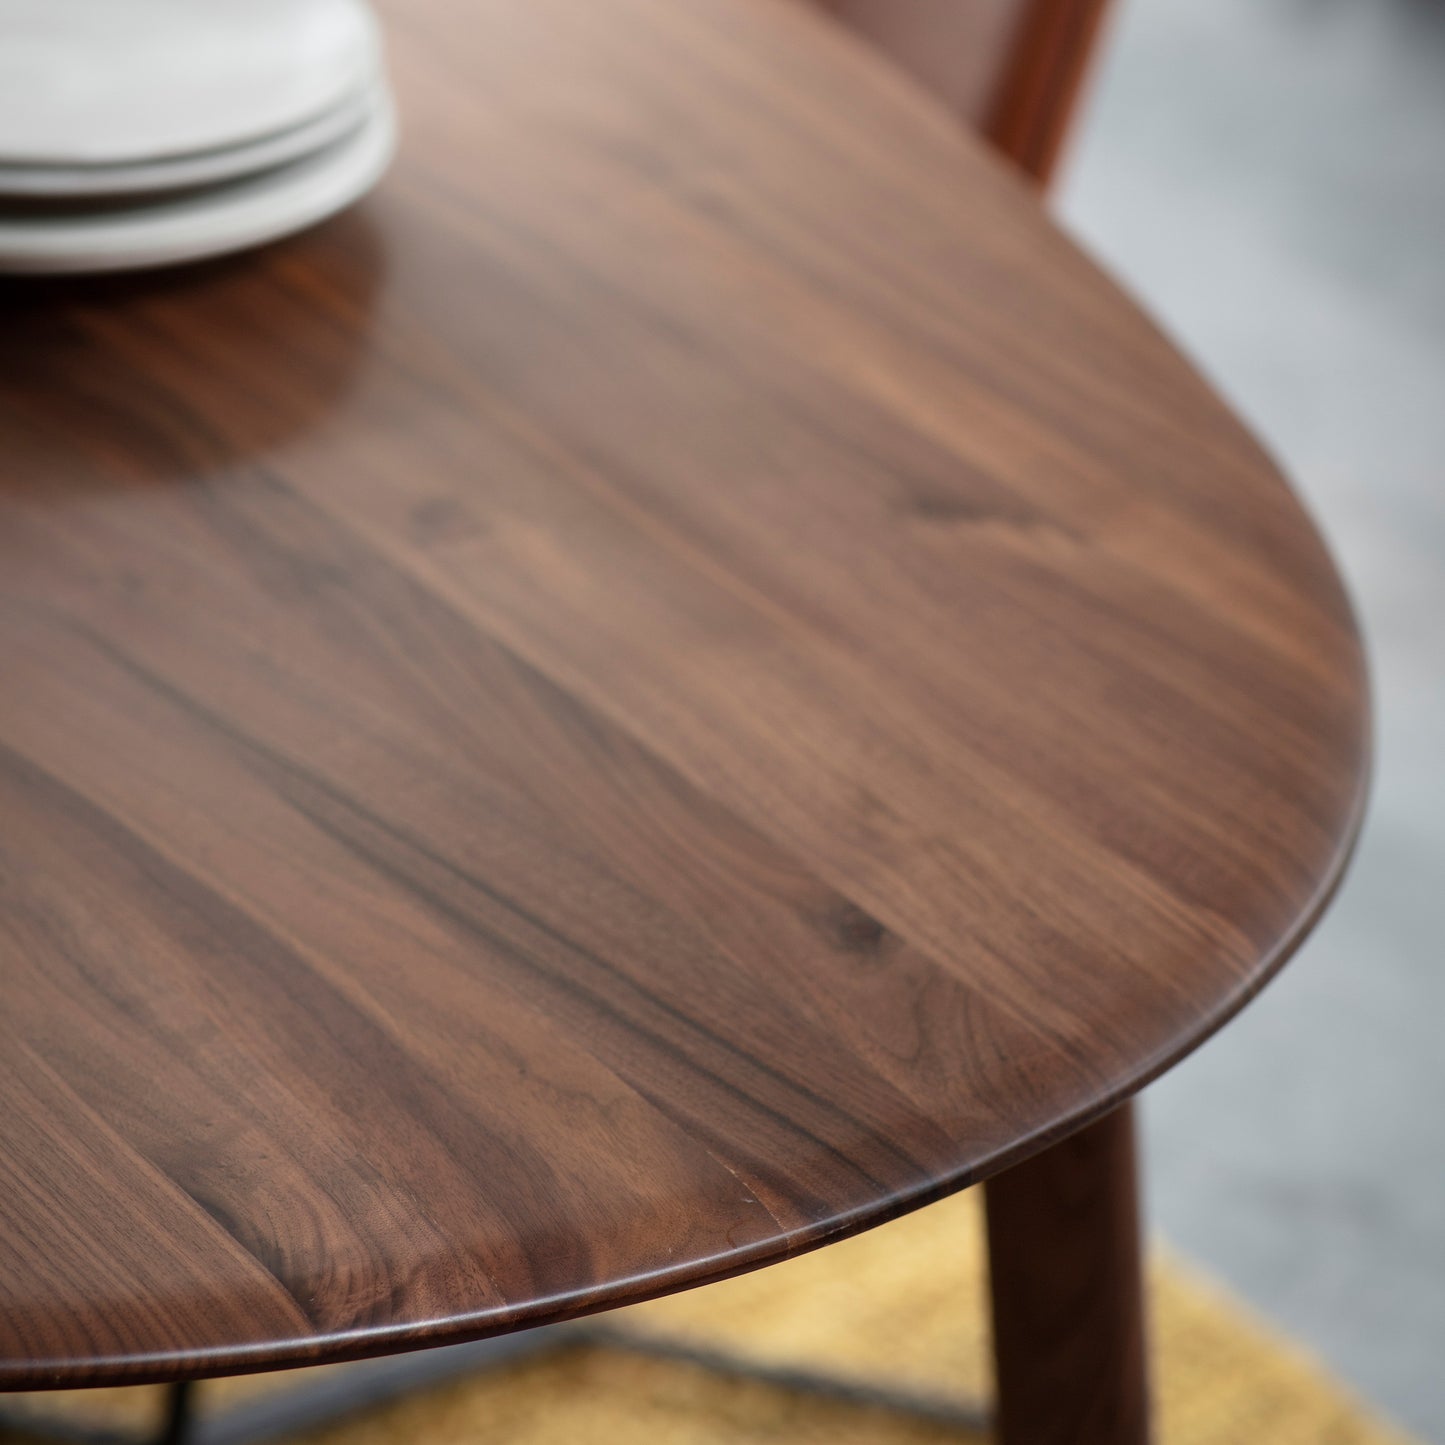 A close up of a Walnut oval dining table from Kikiathome.co.uk with plates on it, perfect for interior decor and home furniture.